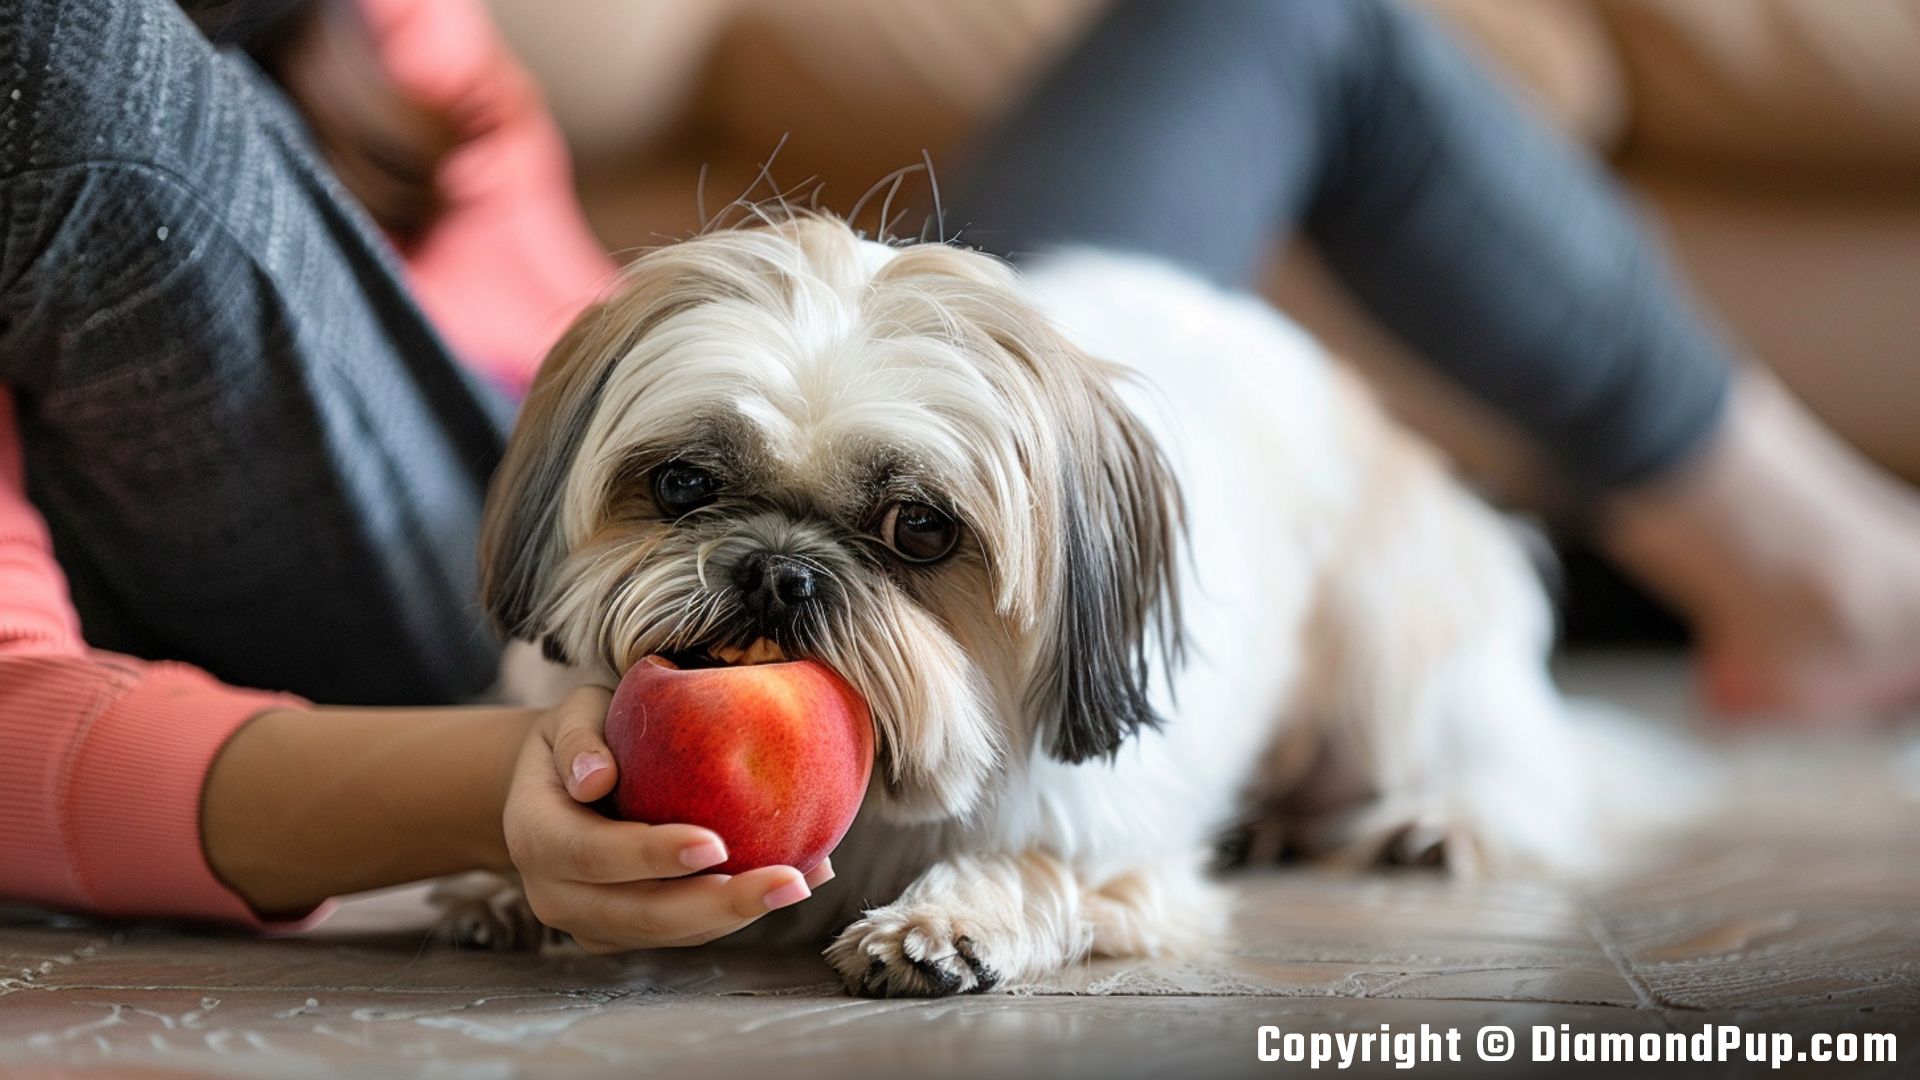 Image of a Playful Shih Tzu Eating Peaches